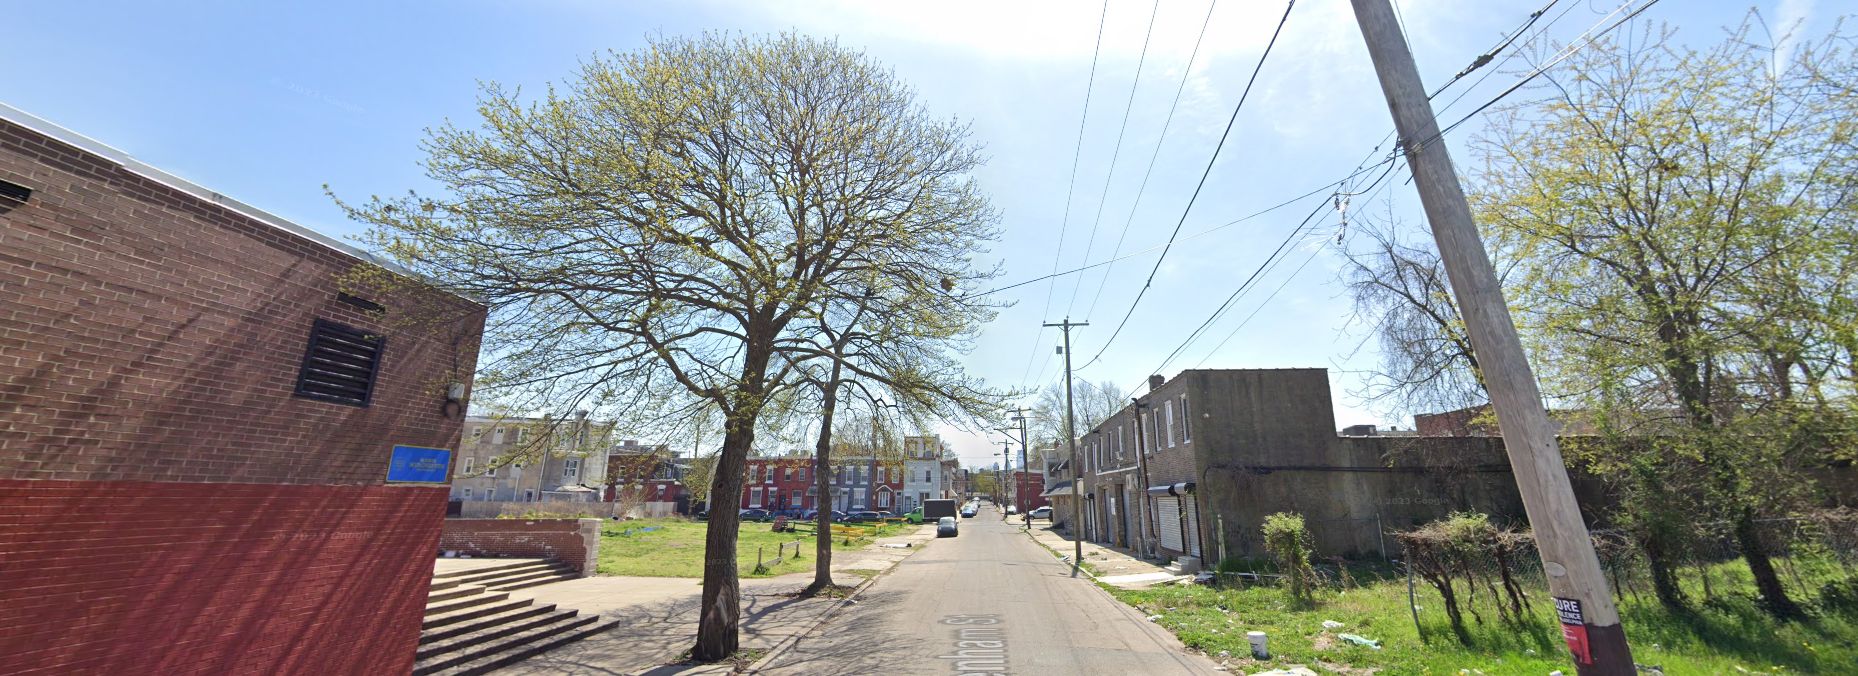 North Sydenham Street, with 2314 North Sydenham Street on the right. Site conditions prior to redevelopment. Looking south. April 2023. Credit: Google Maps